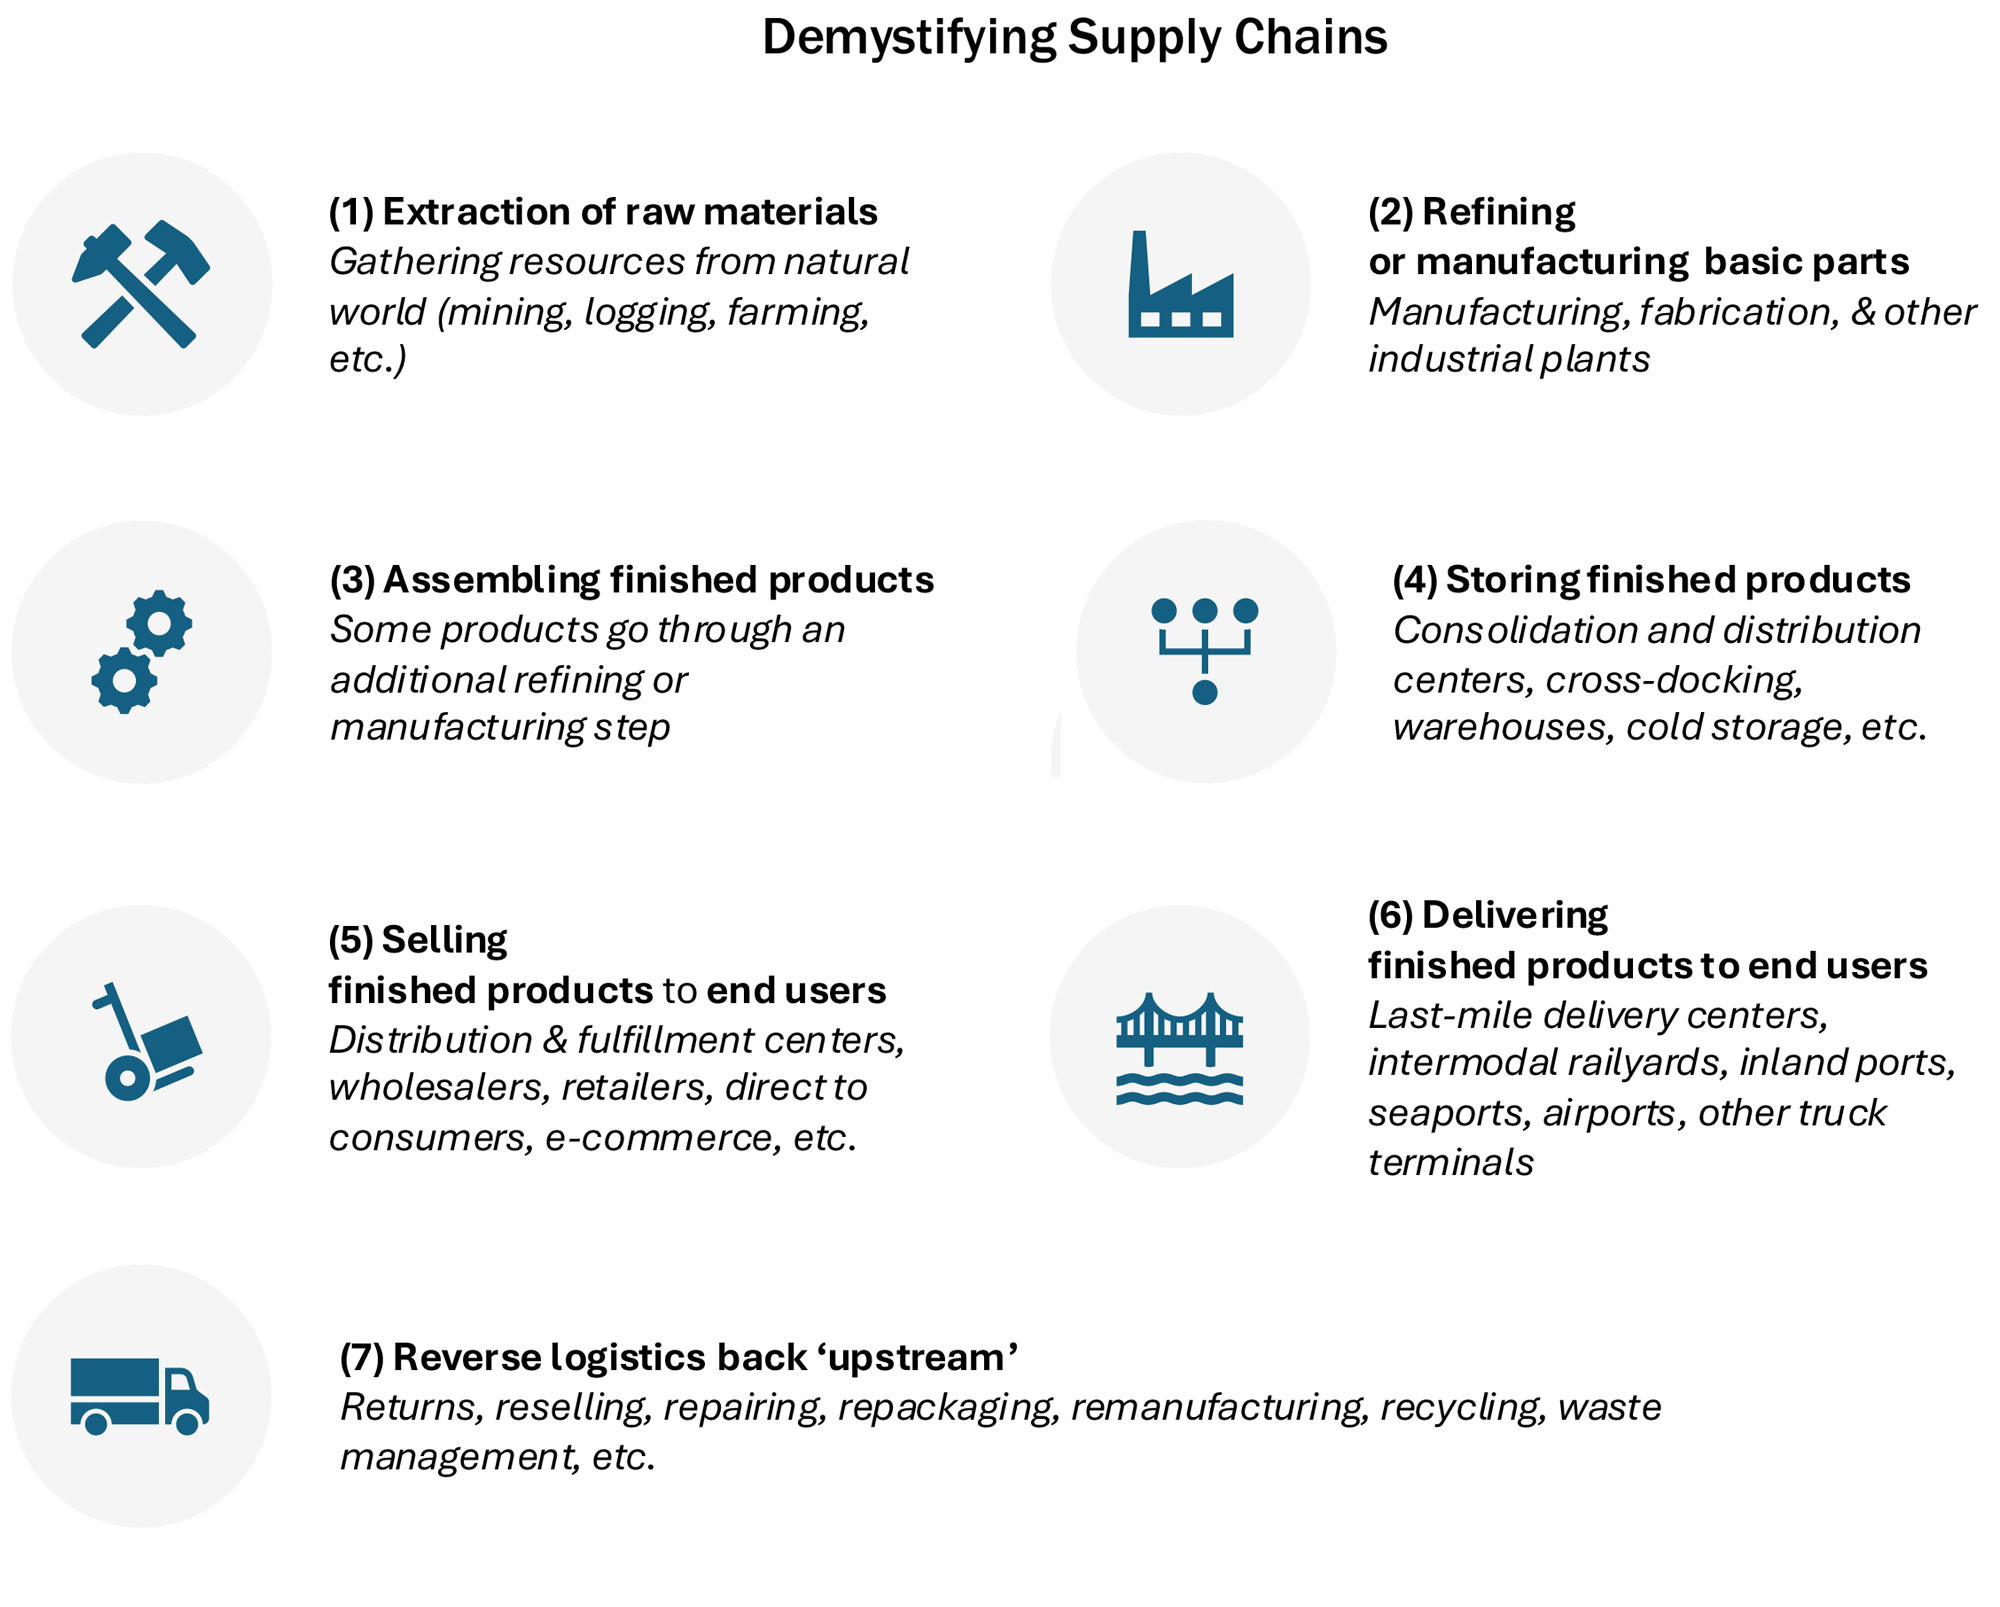 Demystifying Supply Chains shows 7 supply chain steps